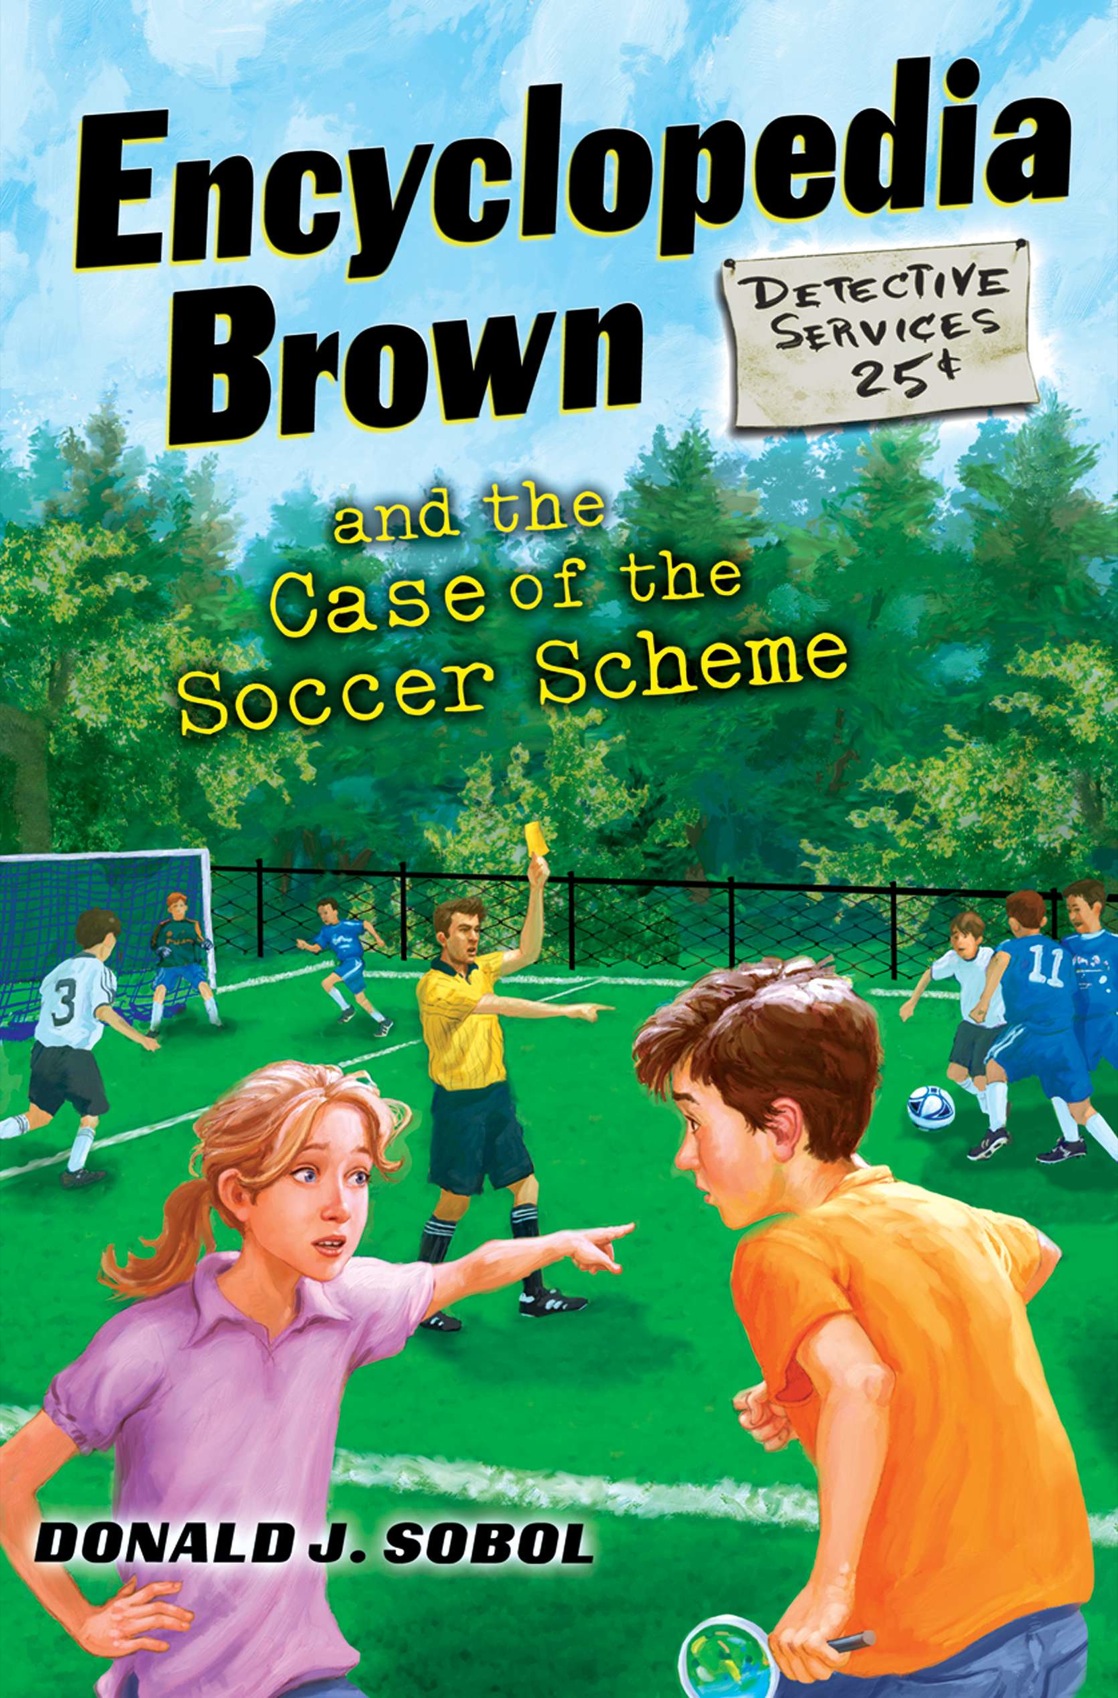 Encyclopedia Brown and the Case of the Soccer Scheme (2012) by Donald J. Sobol